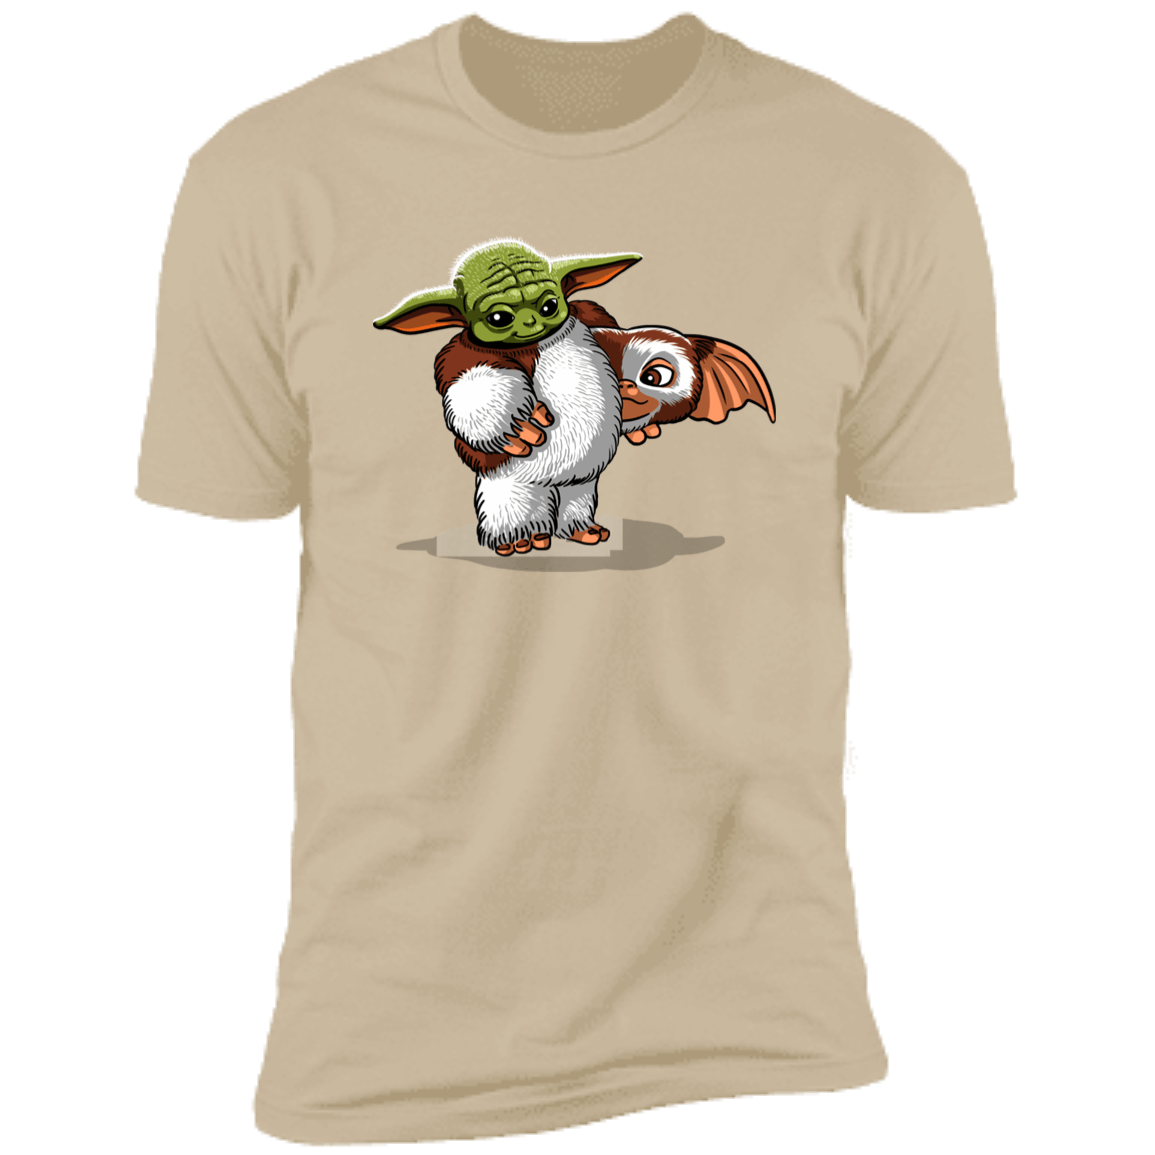 T-Shirts Sand / S Baby in Disguise Men's Premium T-Shirt